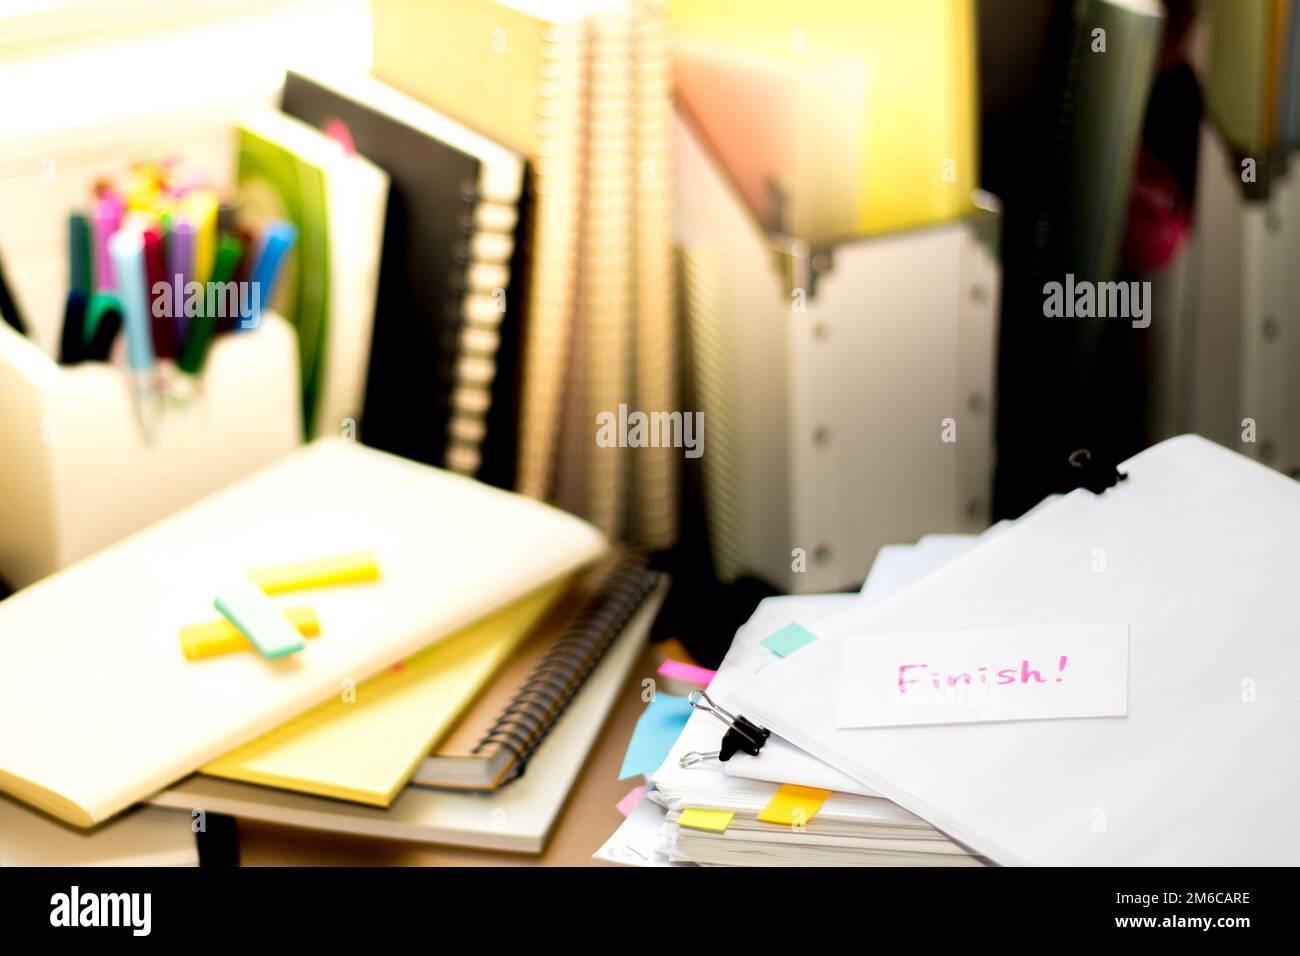 Finish; Stack of Documents. Working or Studying at messy desk. Stock Photo